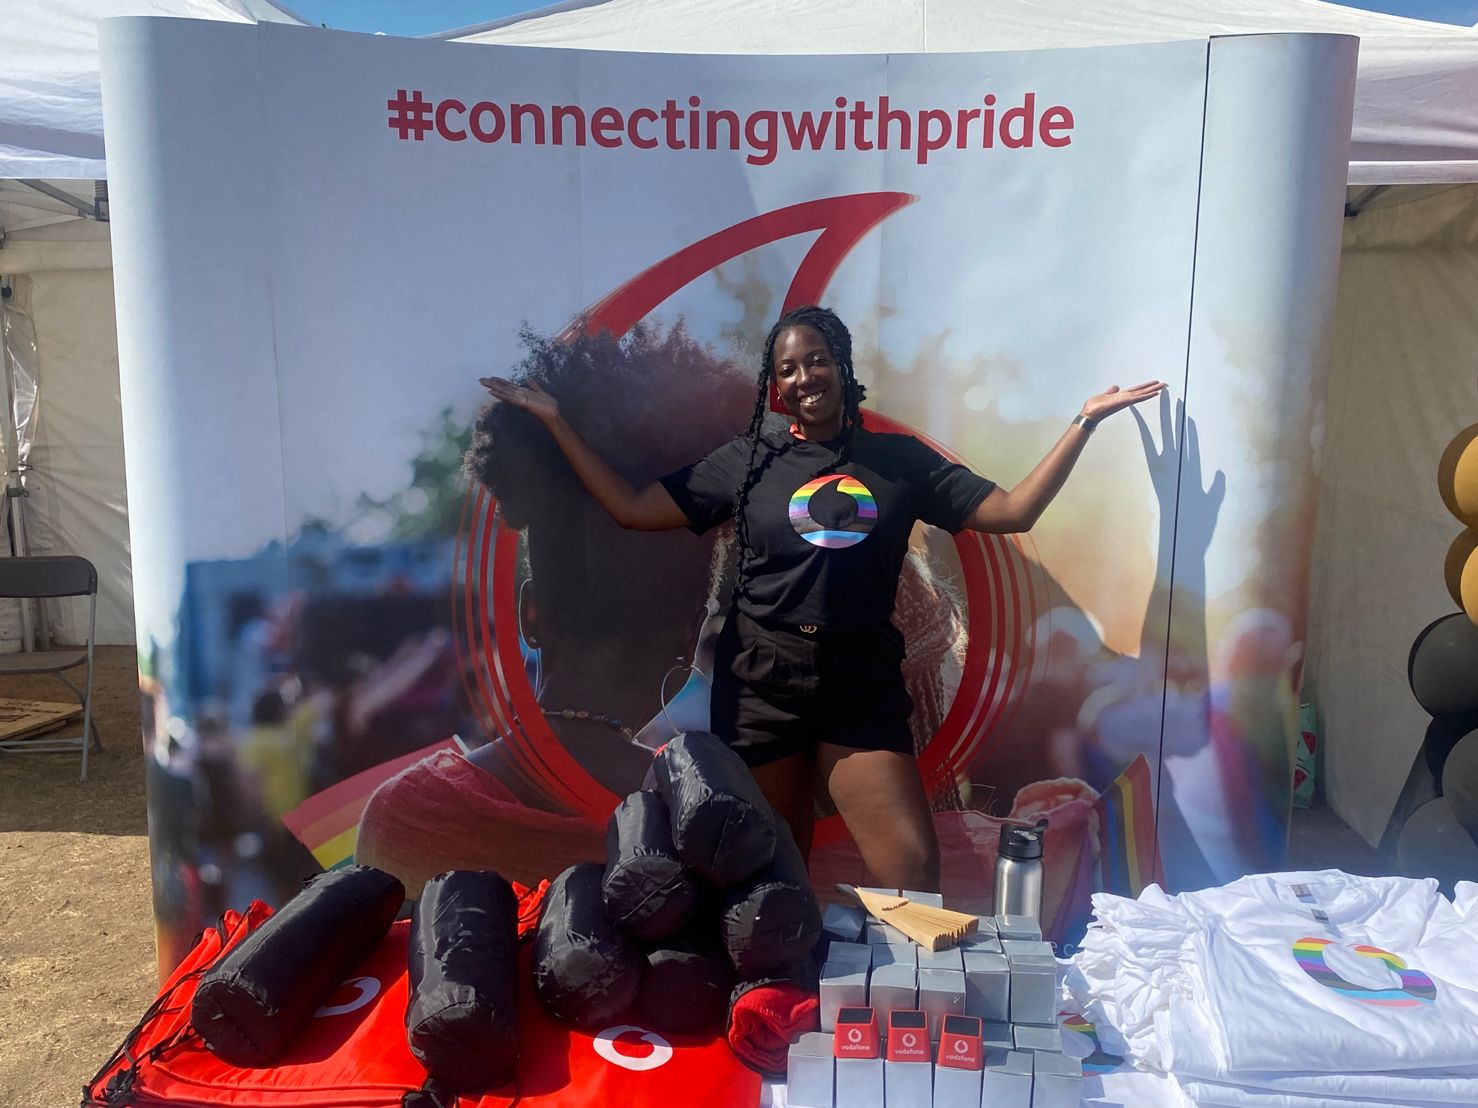 A woman stood in front of the connecting with pride banner at UK Black Pride event